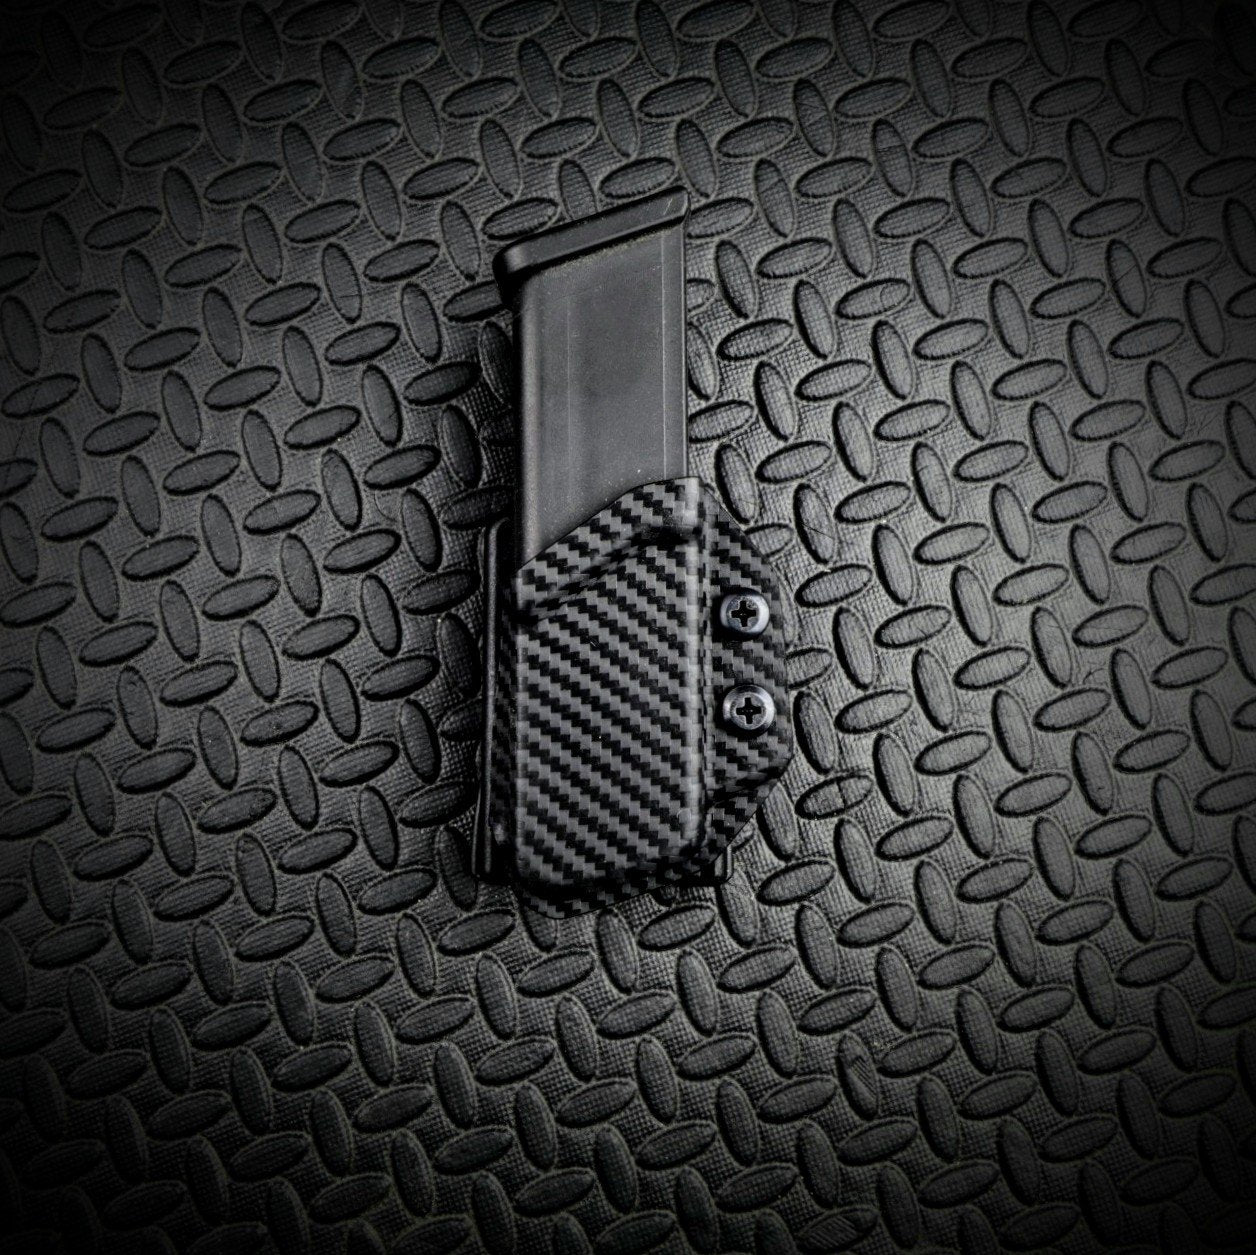 Competition Single Mag Pouch - Gen 2 for Glock 9MM and 40SW (Black Carbon Fiber - Teklok) Kydex Holsters and Mag Pouches